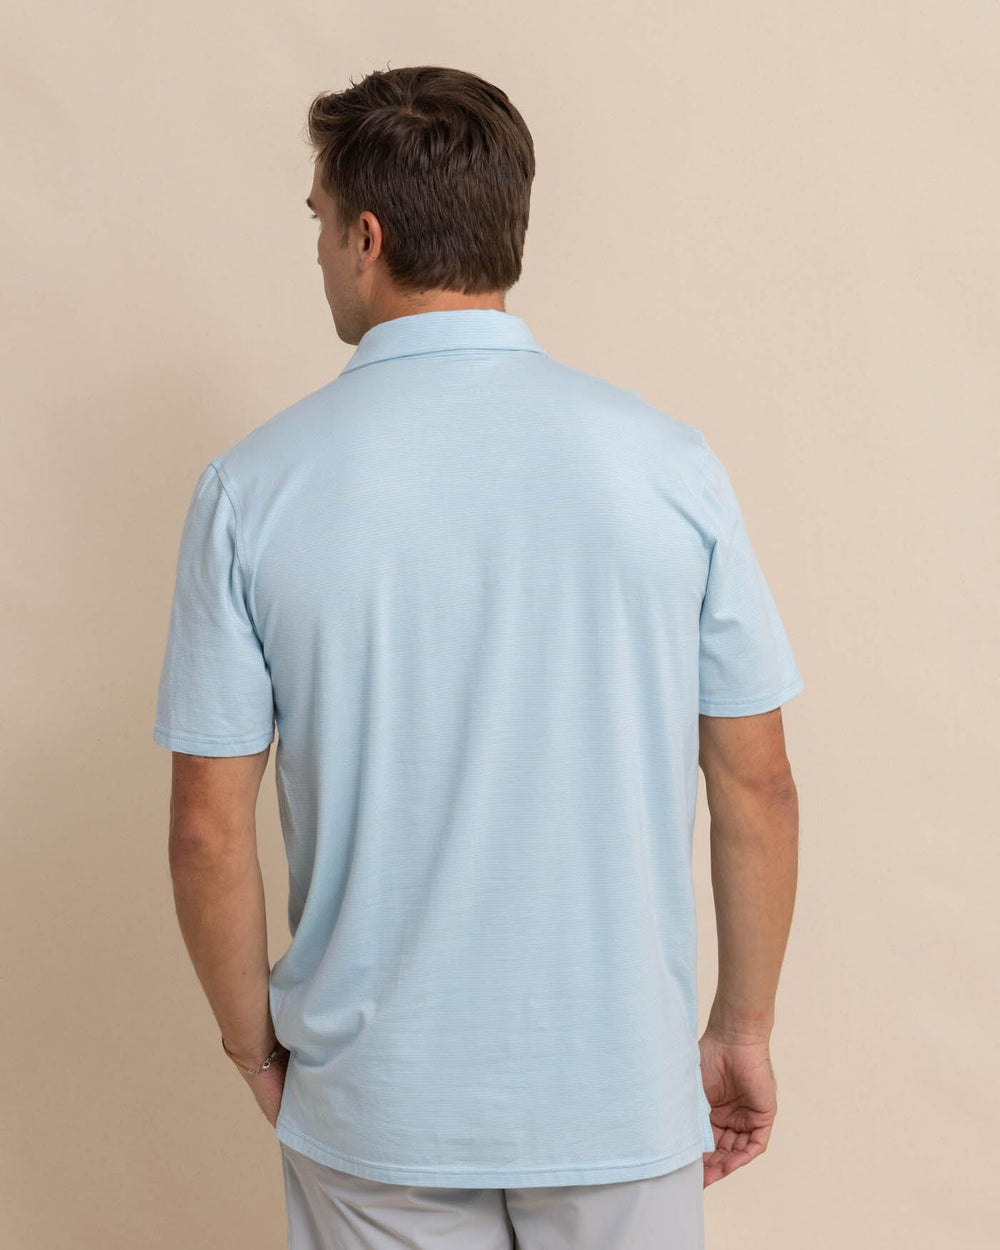 The back view of the Southern Tide The Seaport Davenport Stripe Polo by Southern Tide - Clearwater Blue